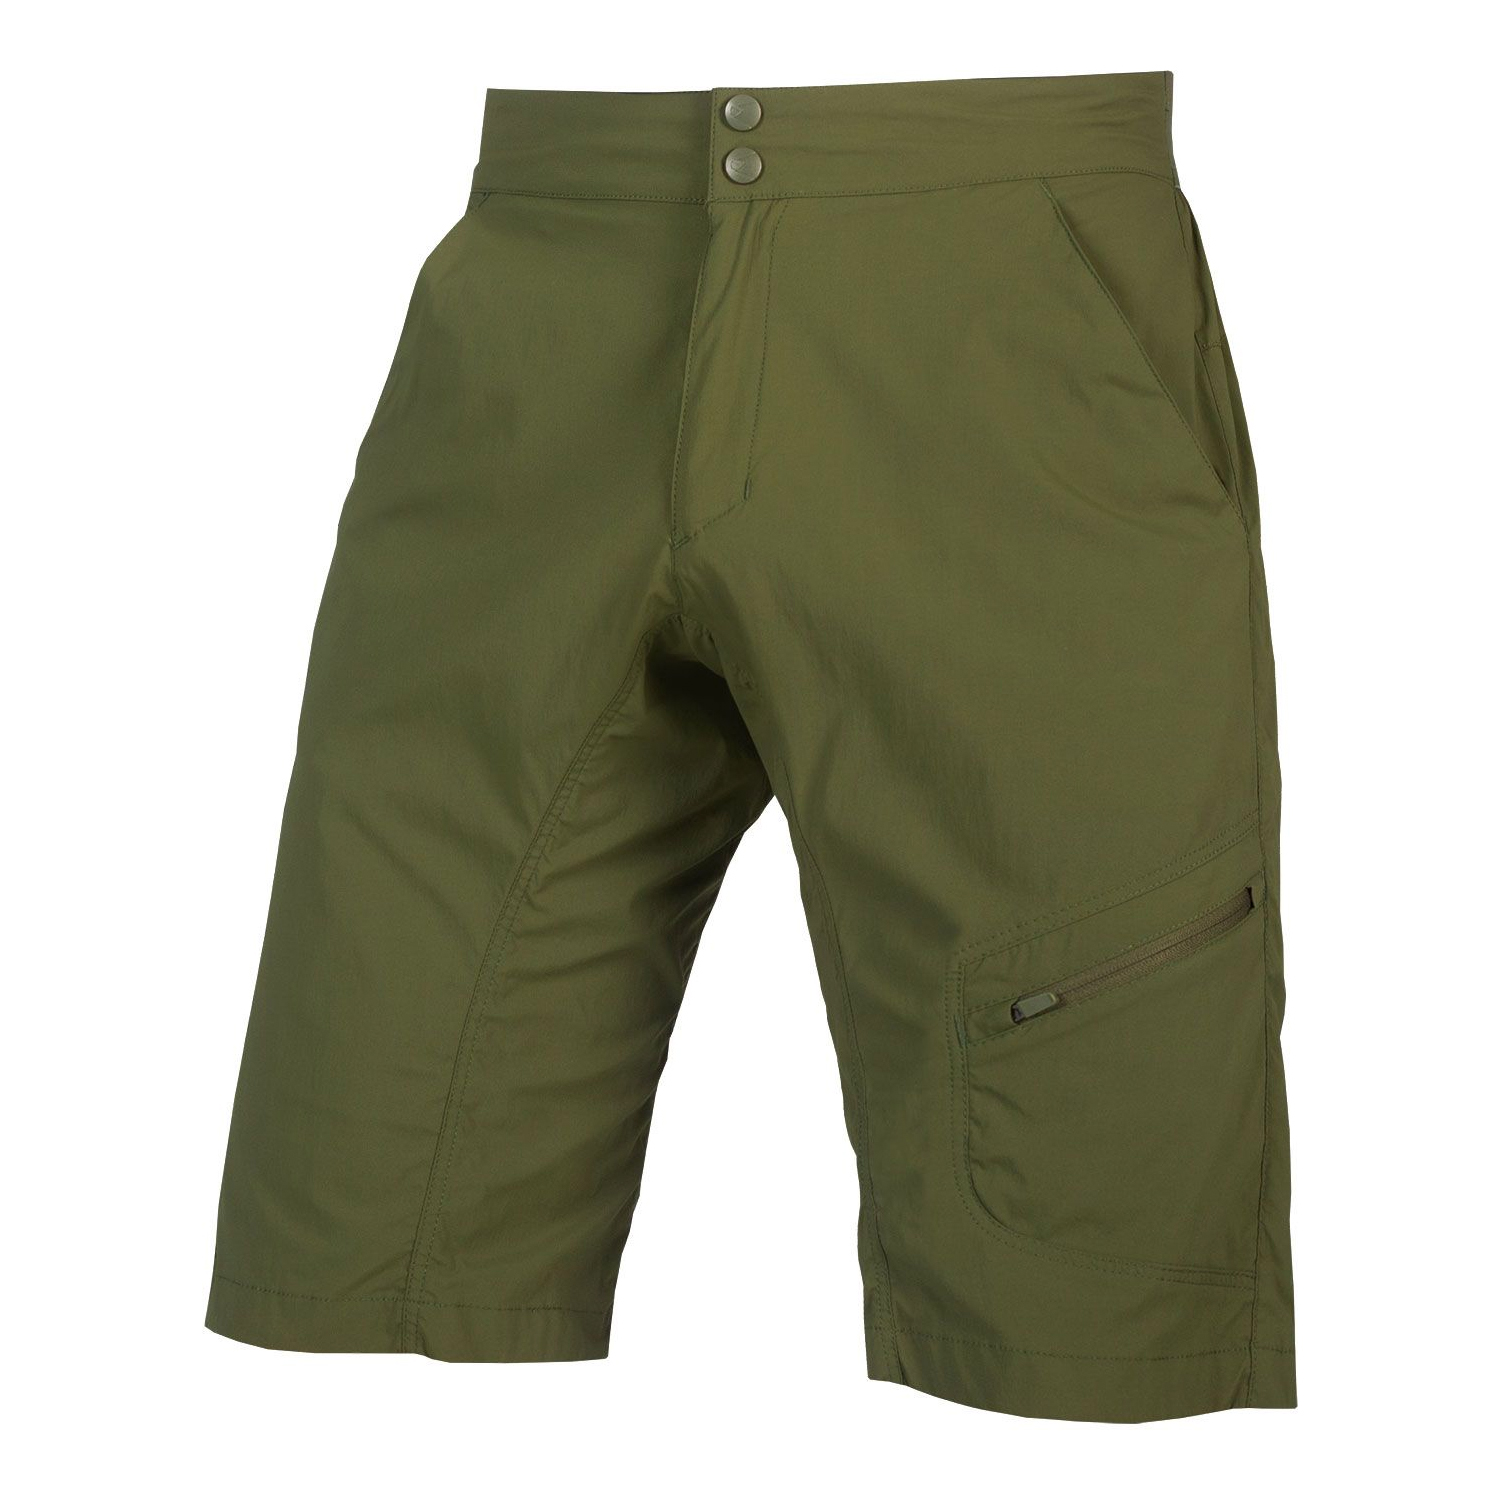 Endura | Hummvee Lite Short with Liner Men's | Size Extra Large in Olive Green